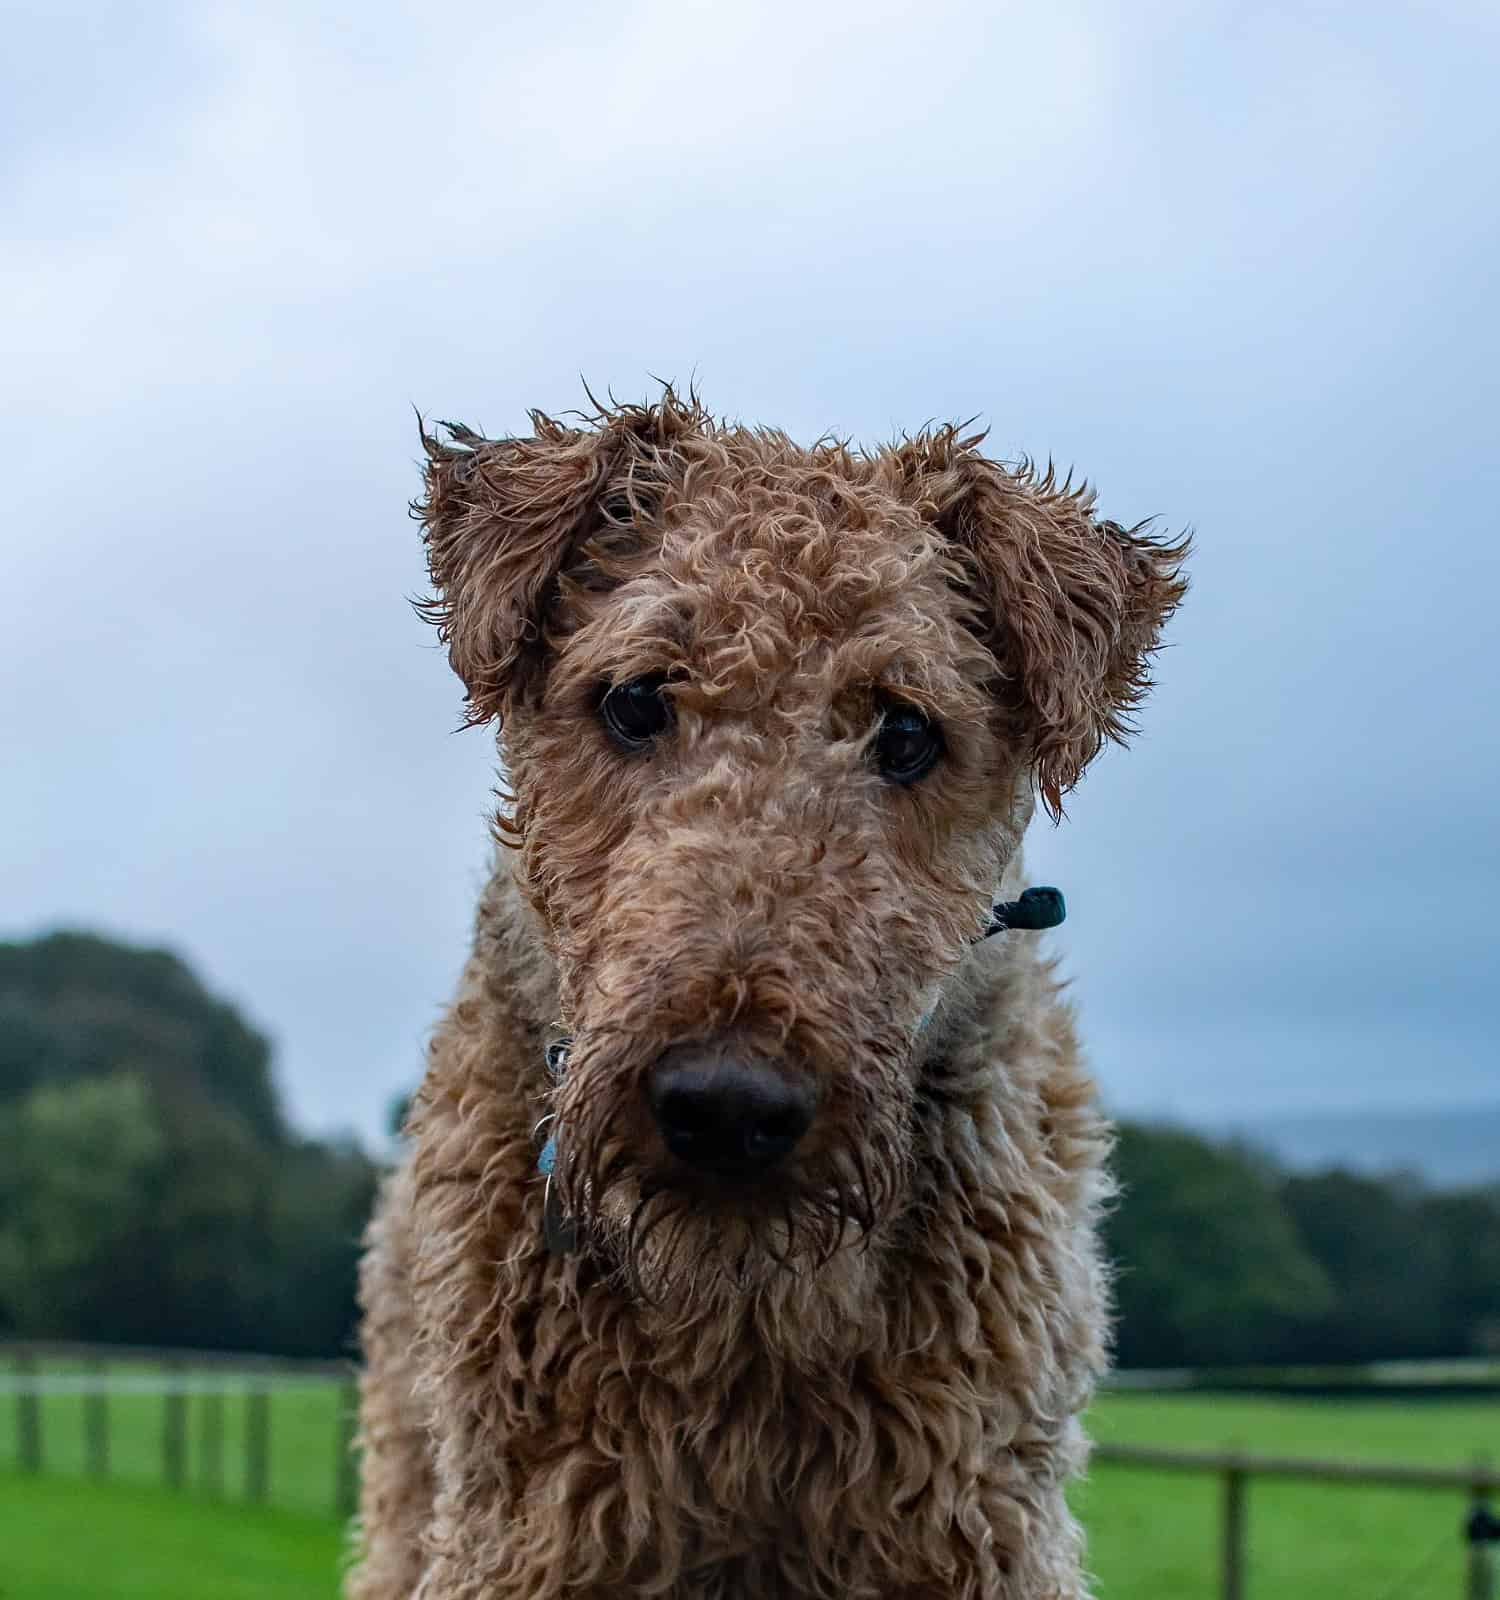 Airedale terrier curiously looking to camera for a portrait, standing in a green grassy field. The dog's coat gives the appearance of a teddy bear. Pet photography. 